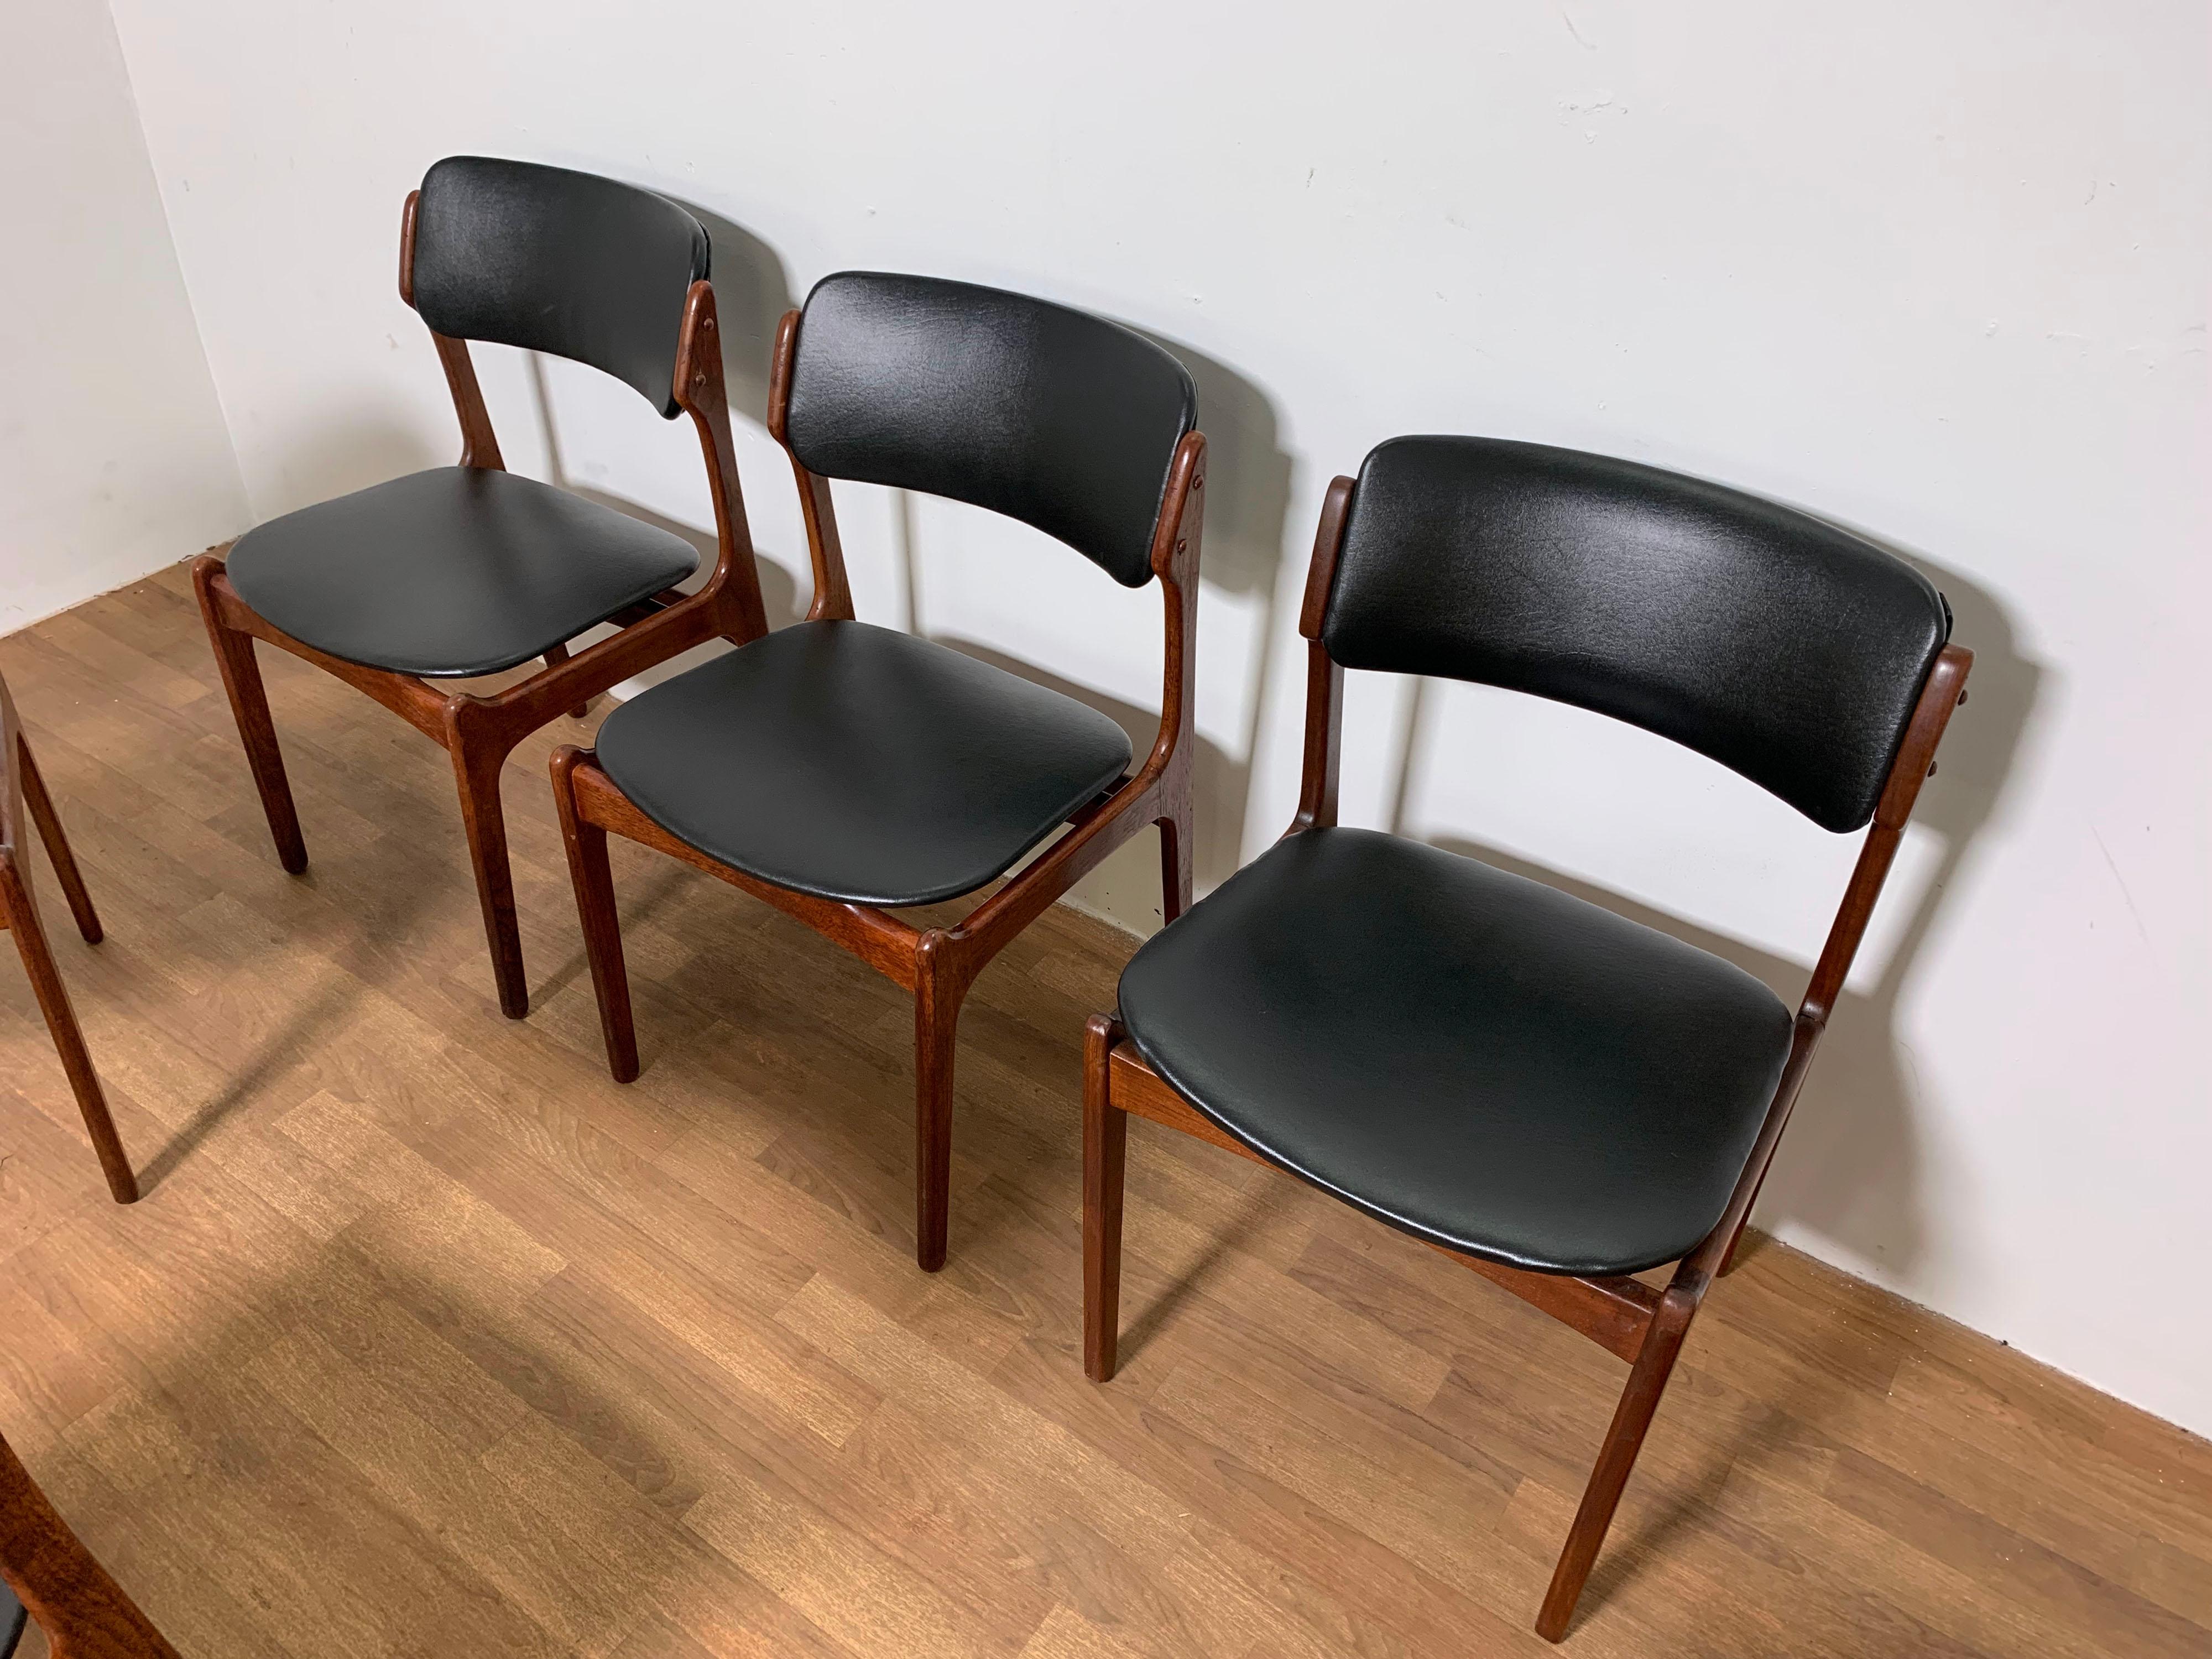 Set of six teak dining chairs by Erik Buch, for Odense Mobelfabrik, made in Denmark circa 1960s. 

Note that the prior owner apparently acquired two chairs to add to a set of four. These are all original model 49 dining chairs, but based on their